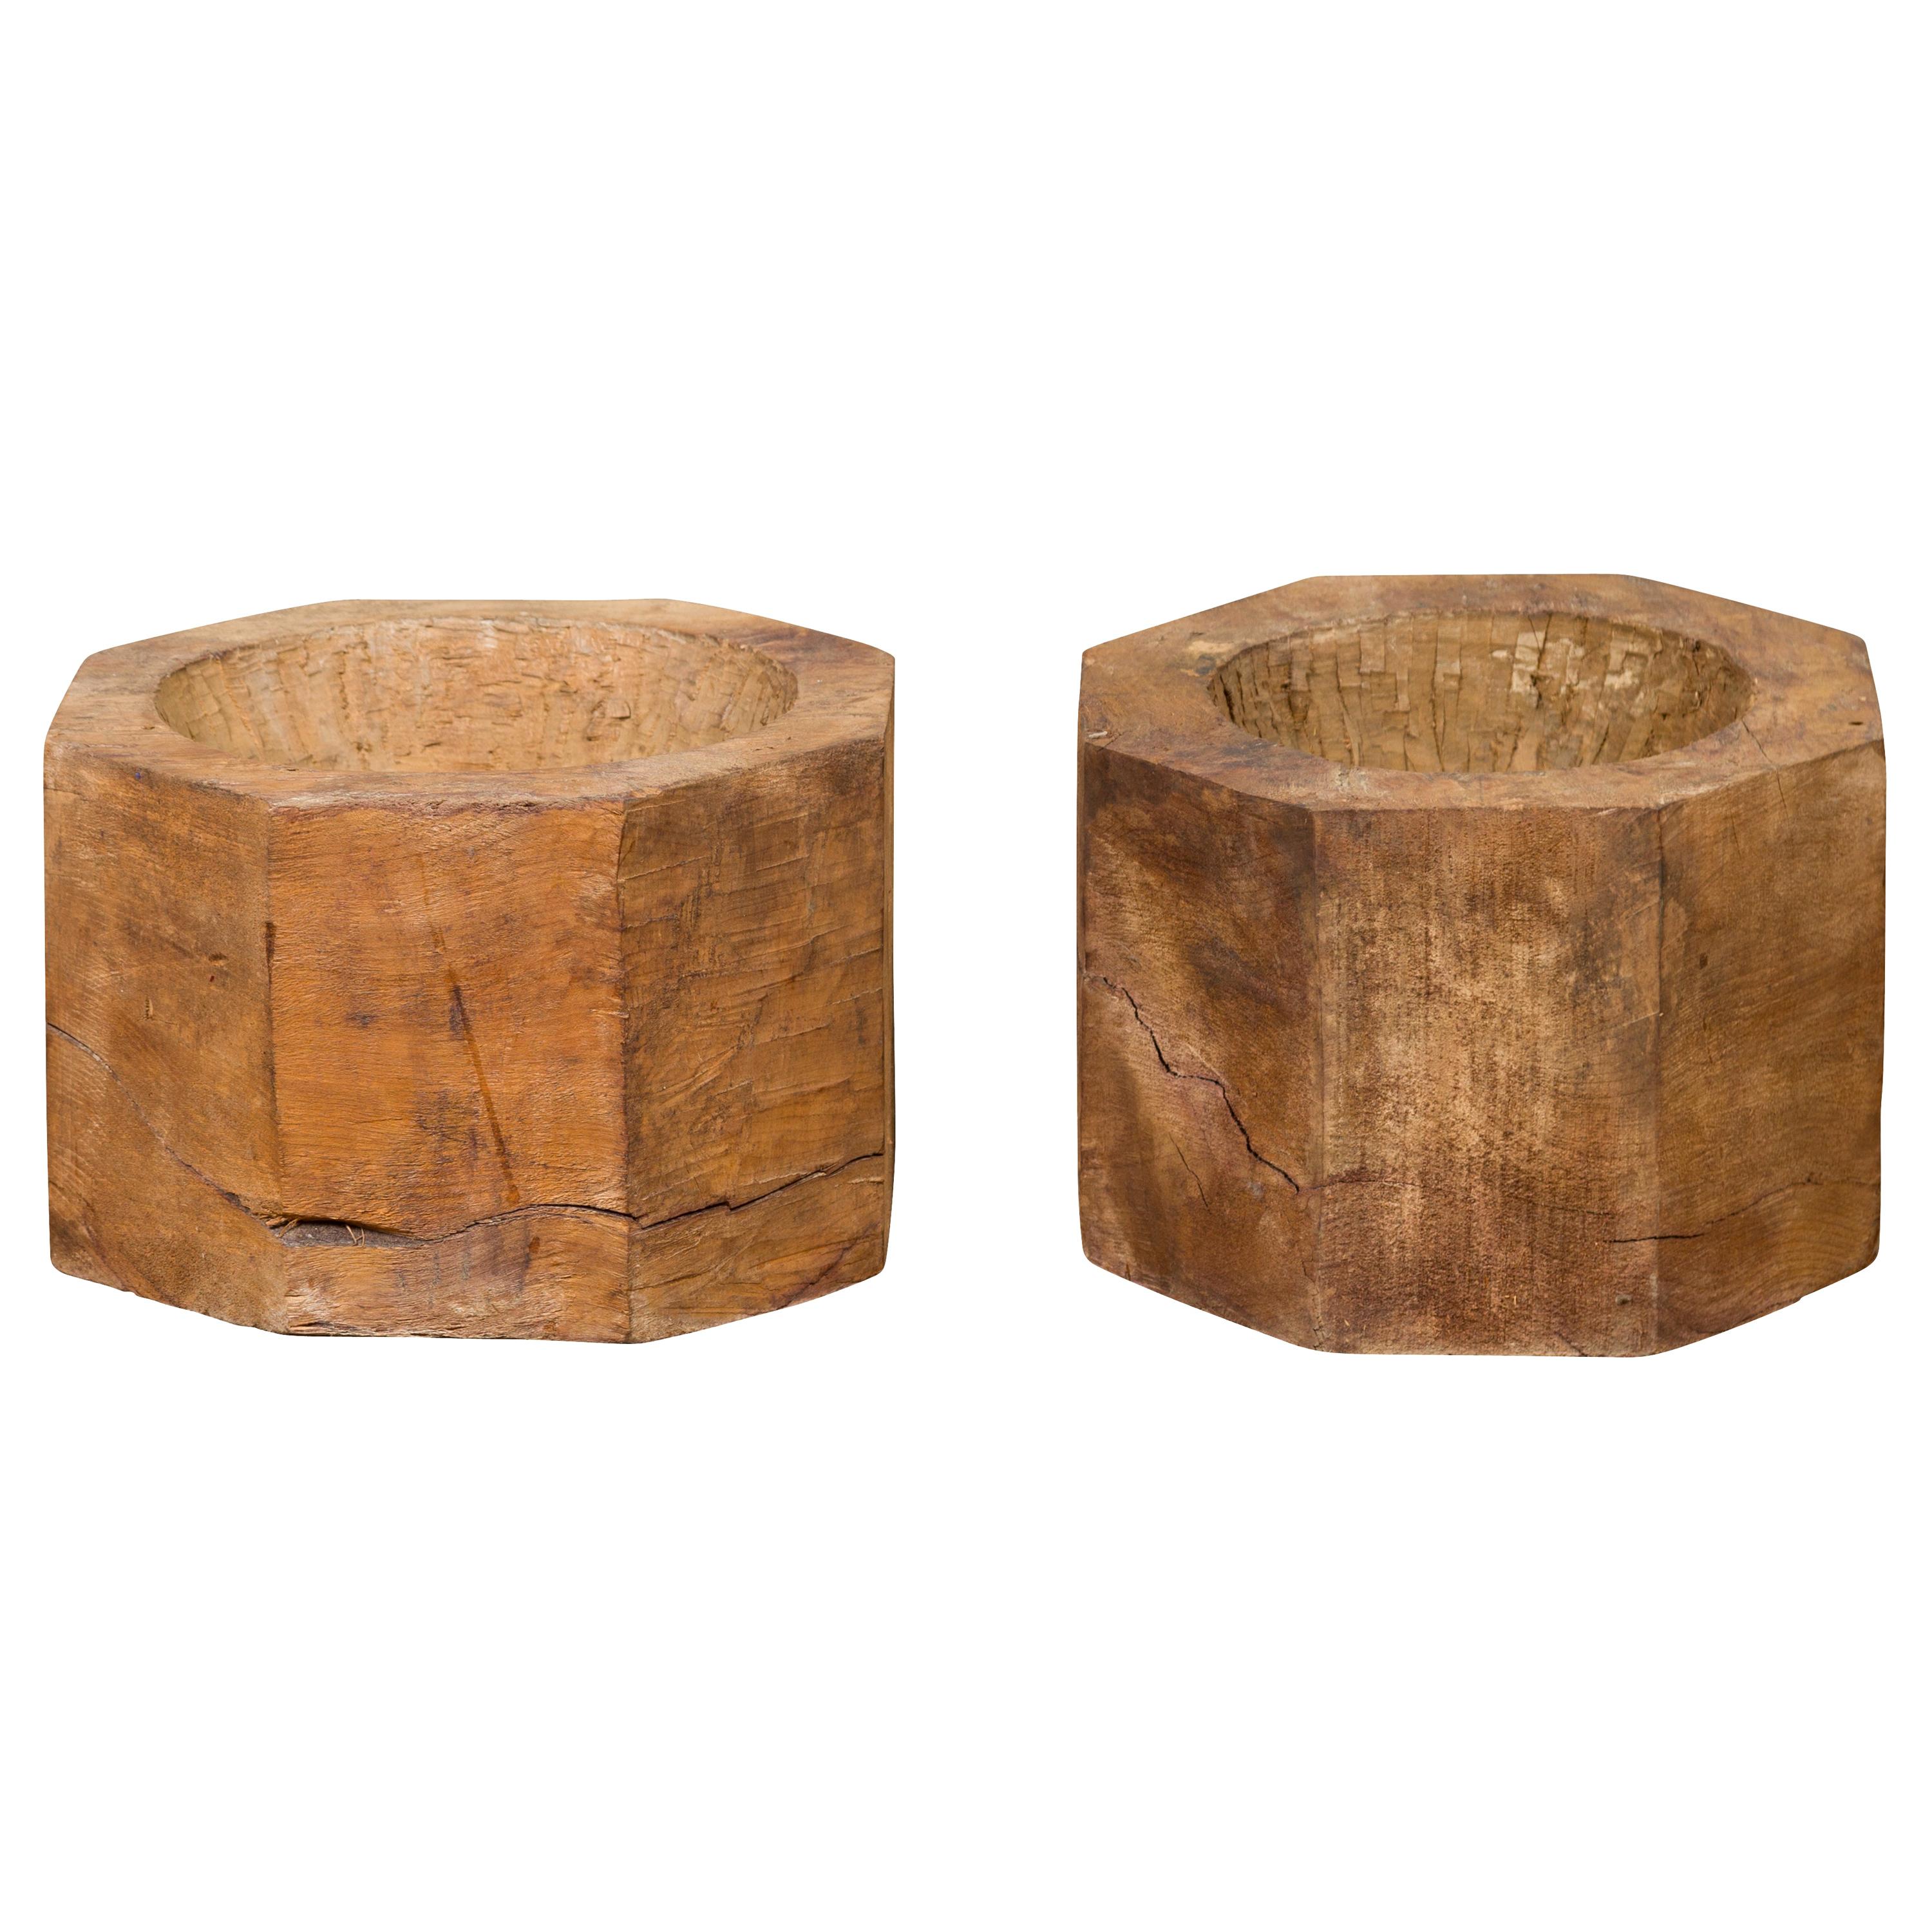 Antique Indonesian Rustic Octagonal Wooden Planters Made from Tree Trunks For Sale